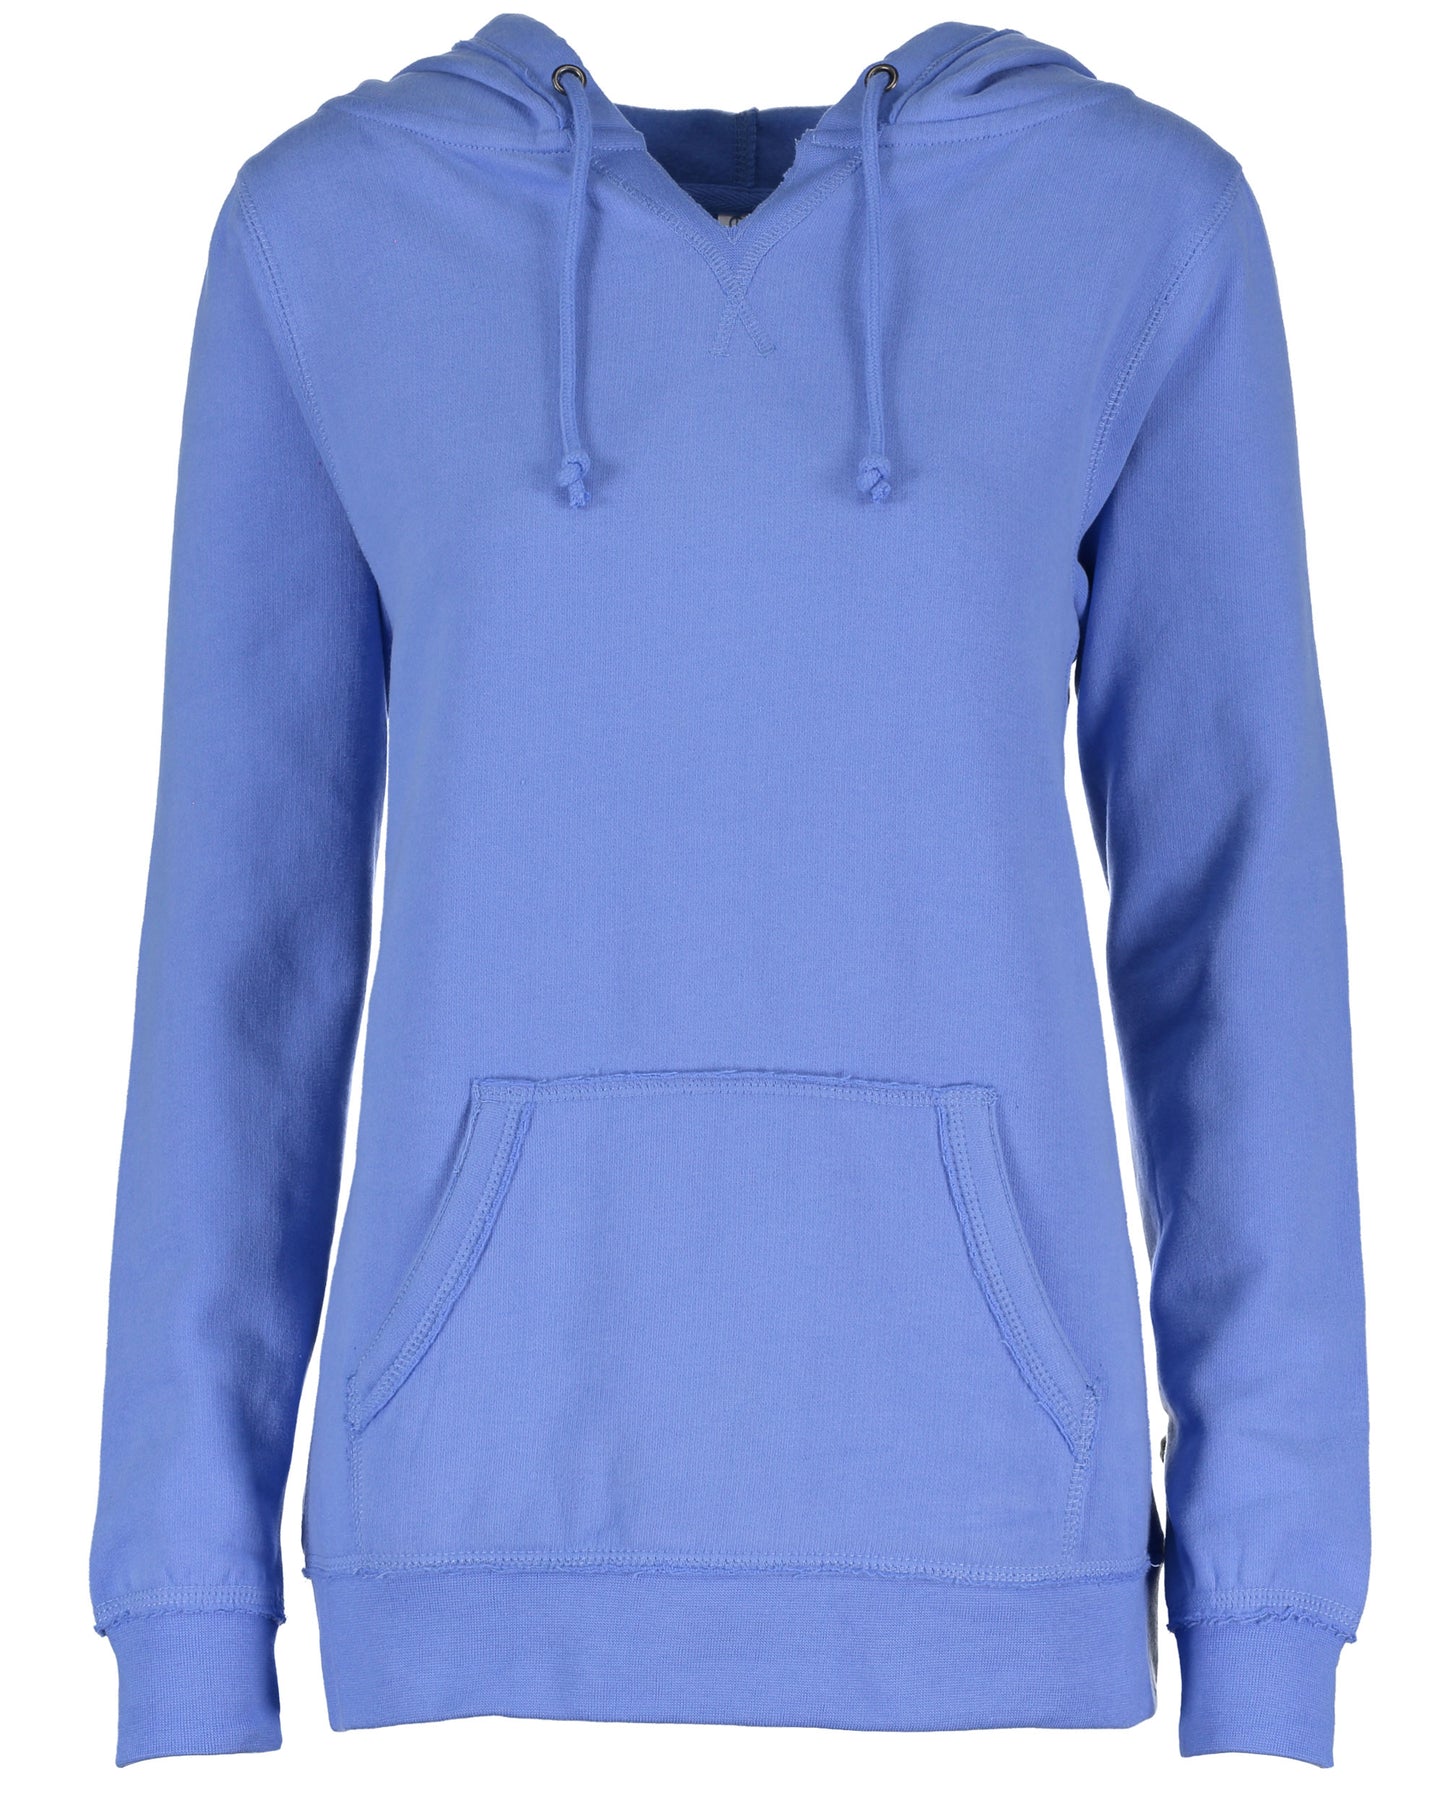 LL "Life is Better at Loon Lake" Enza Ladies V-Notch Fleece Pullover Hood